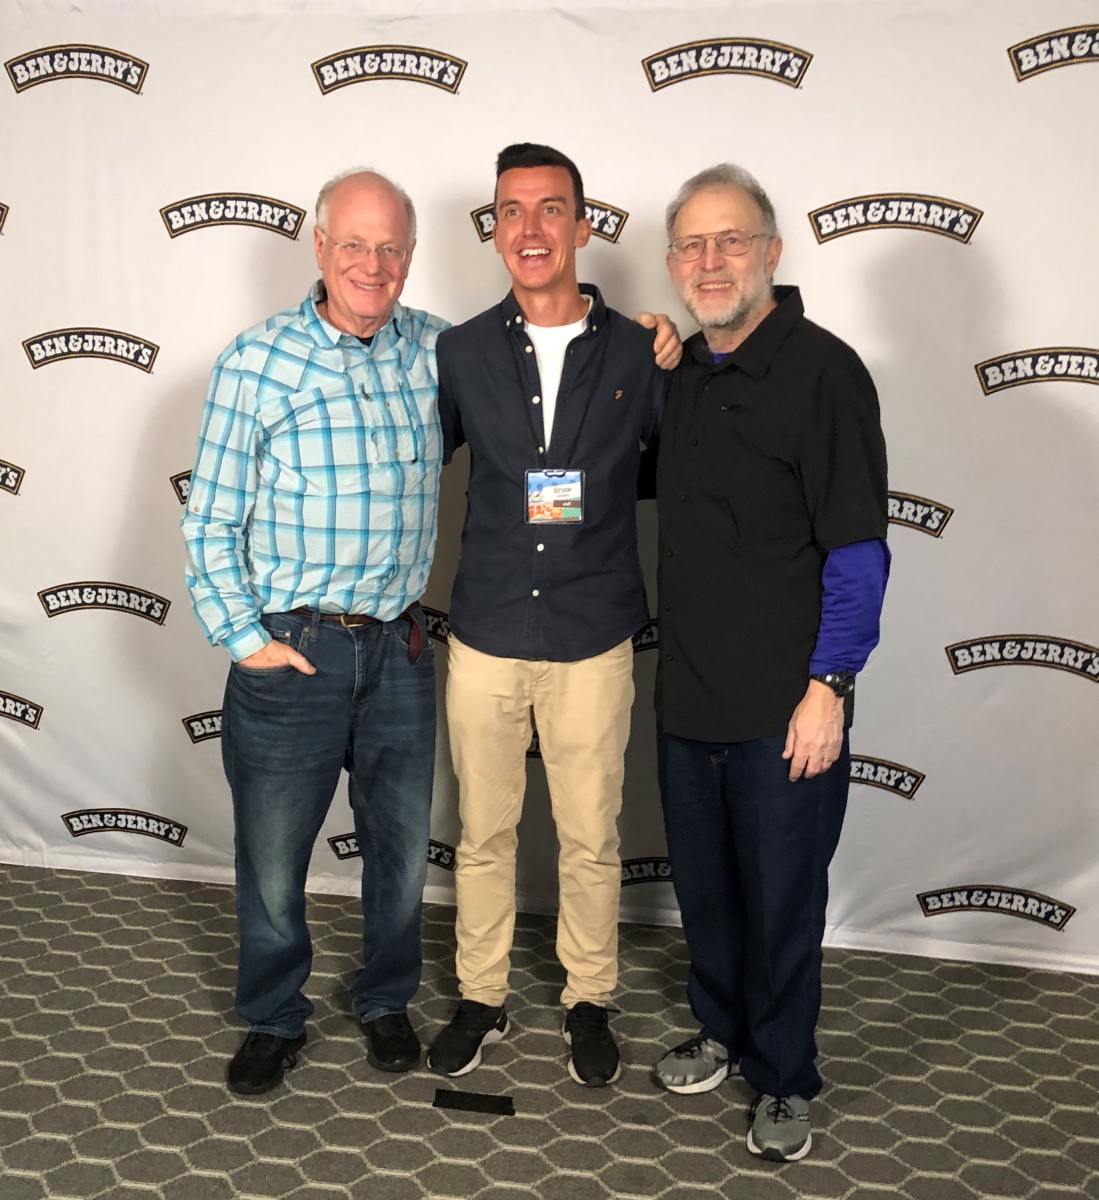 "Bruce Lambert with the co-founders of Ben & Jerrys."